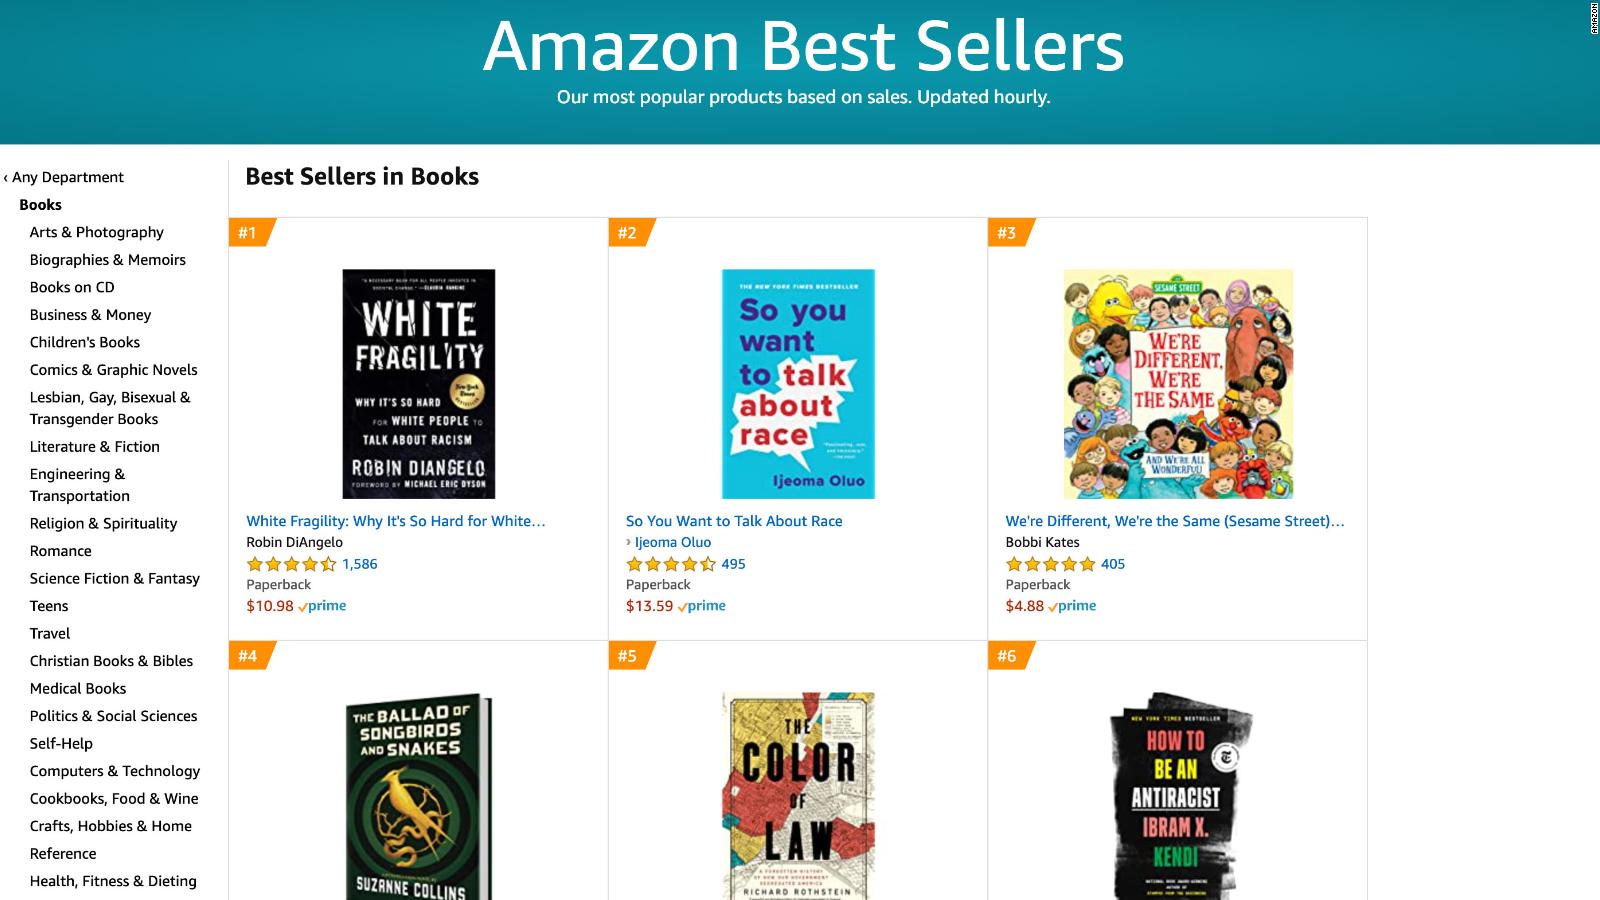 Amazon's best sellers list is dominated almost entirely by books on